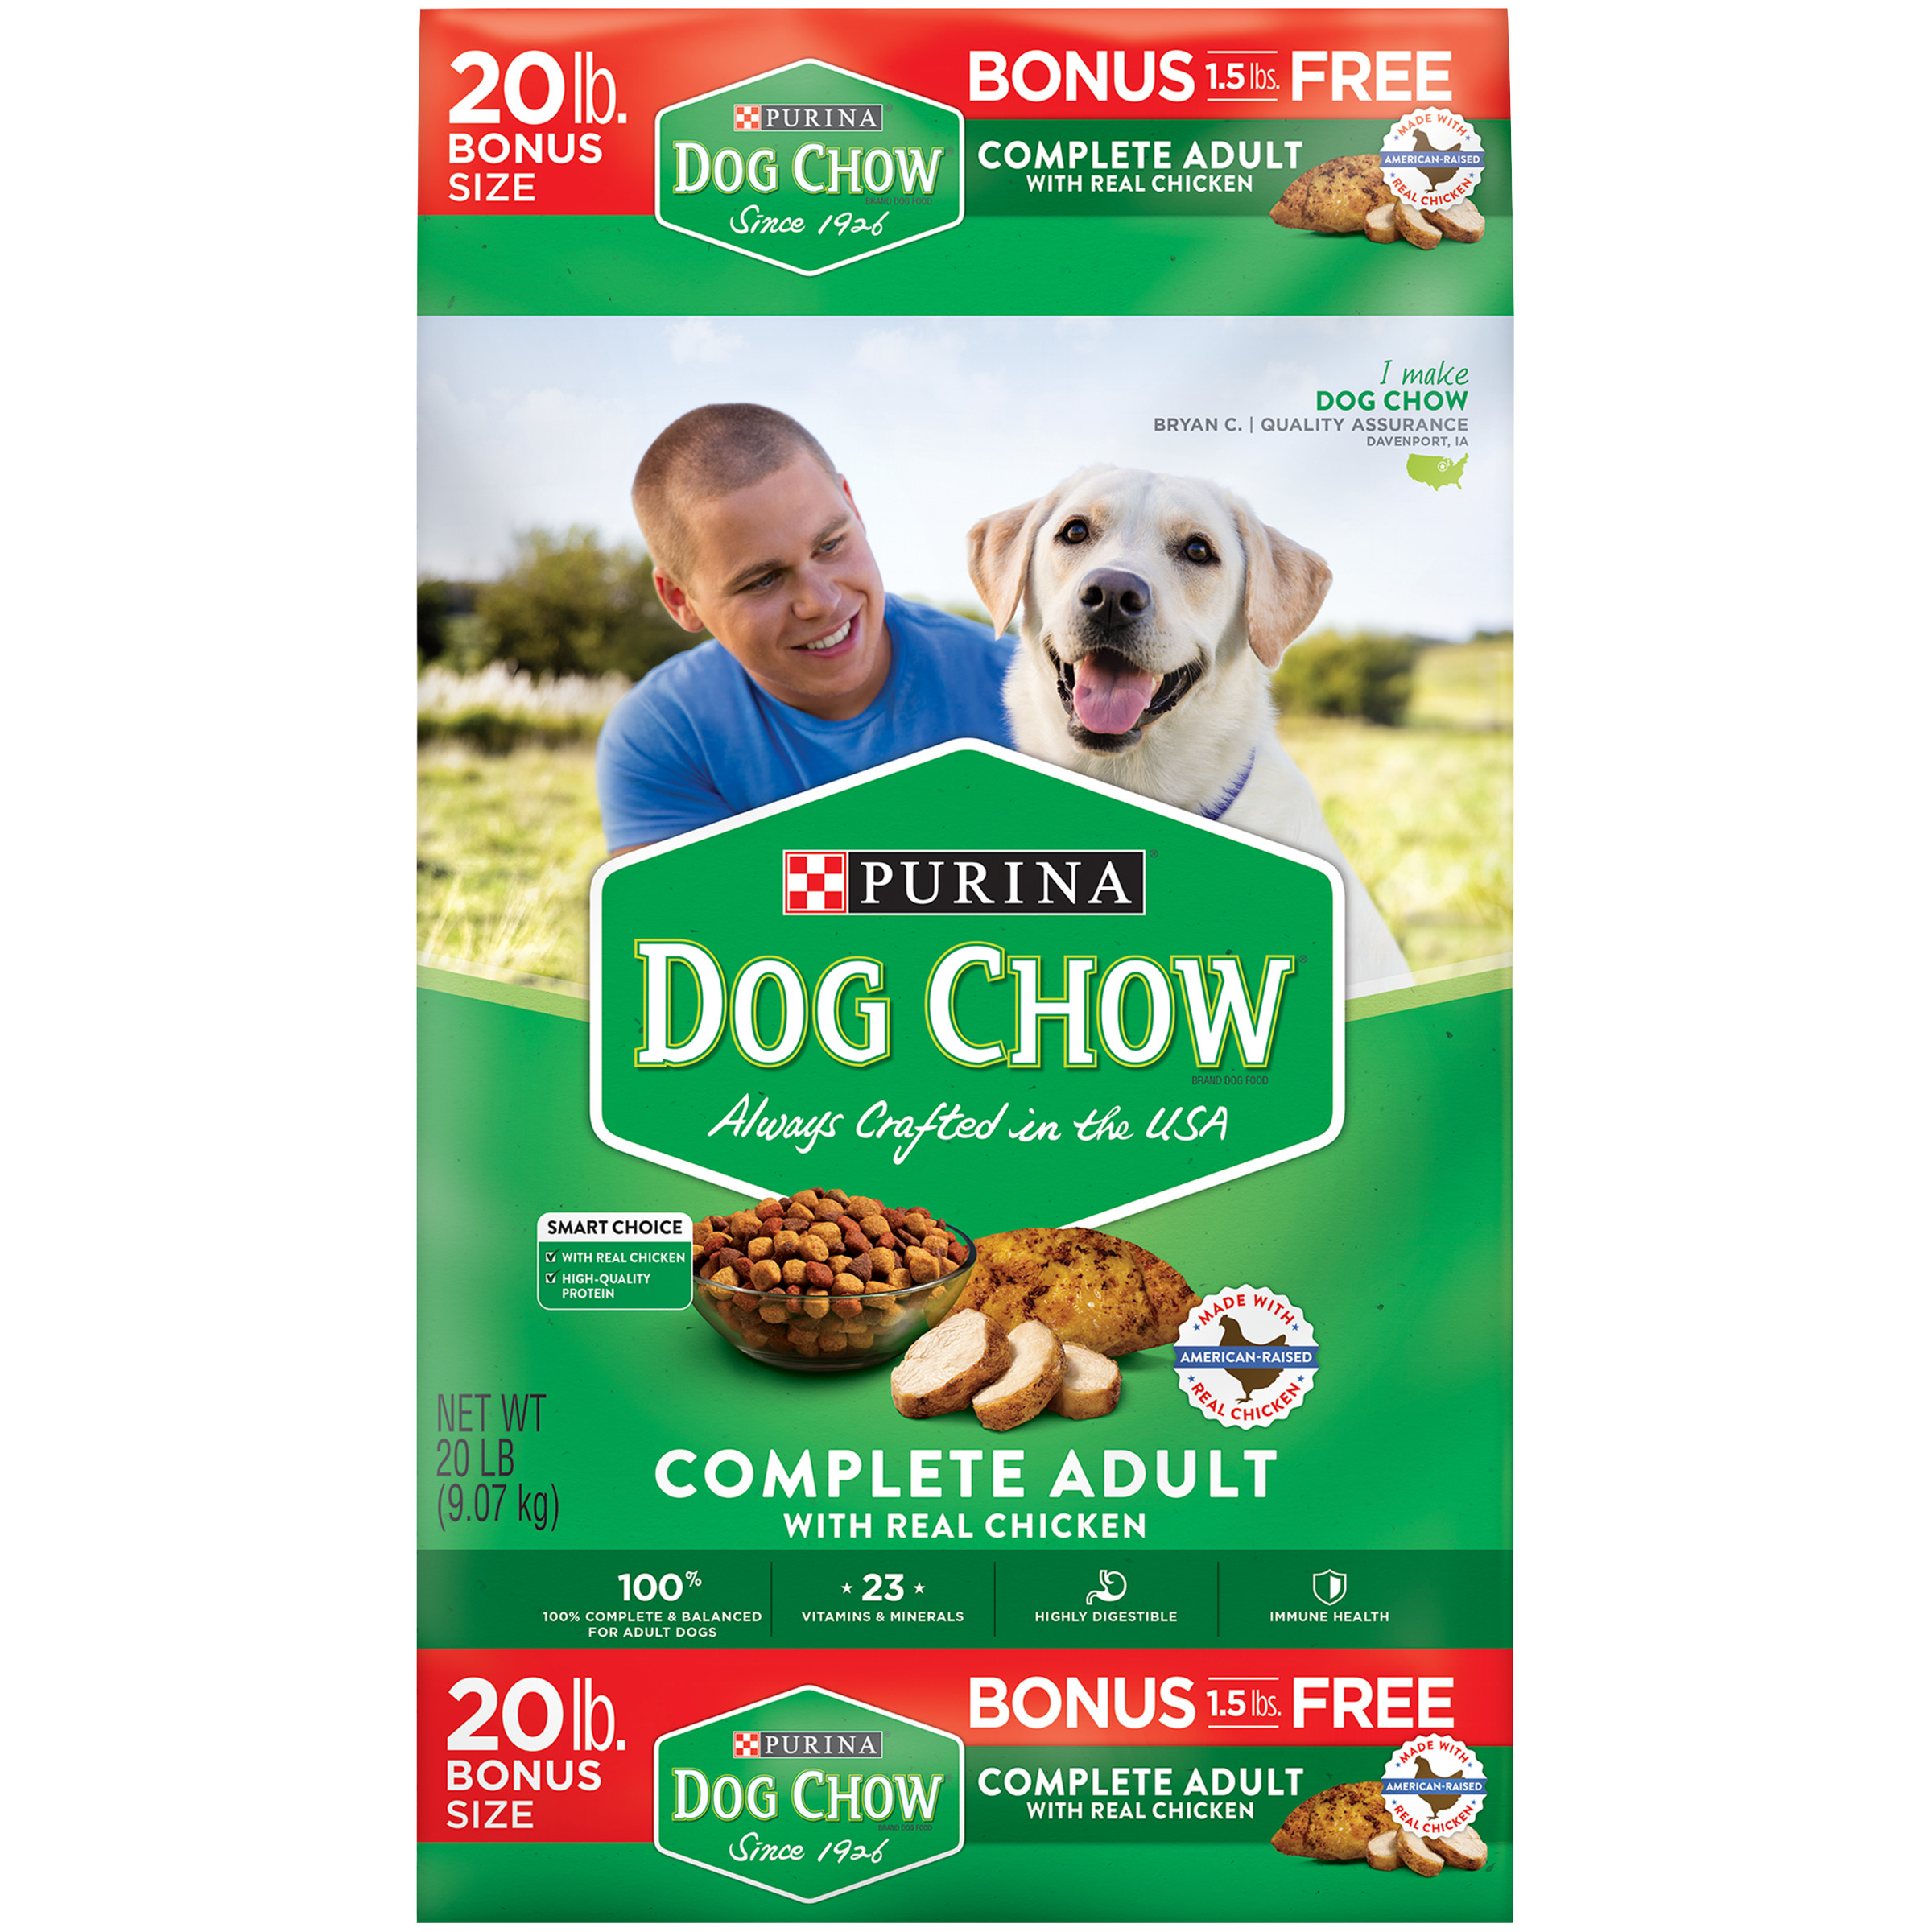 Purina Dog Chow Dry Dog Food, Complete Adult With Real Chicken, 20 lb. Bag - image 1 of 12